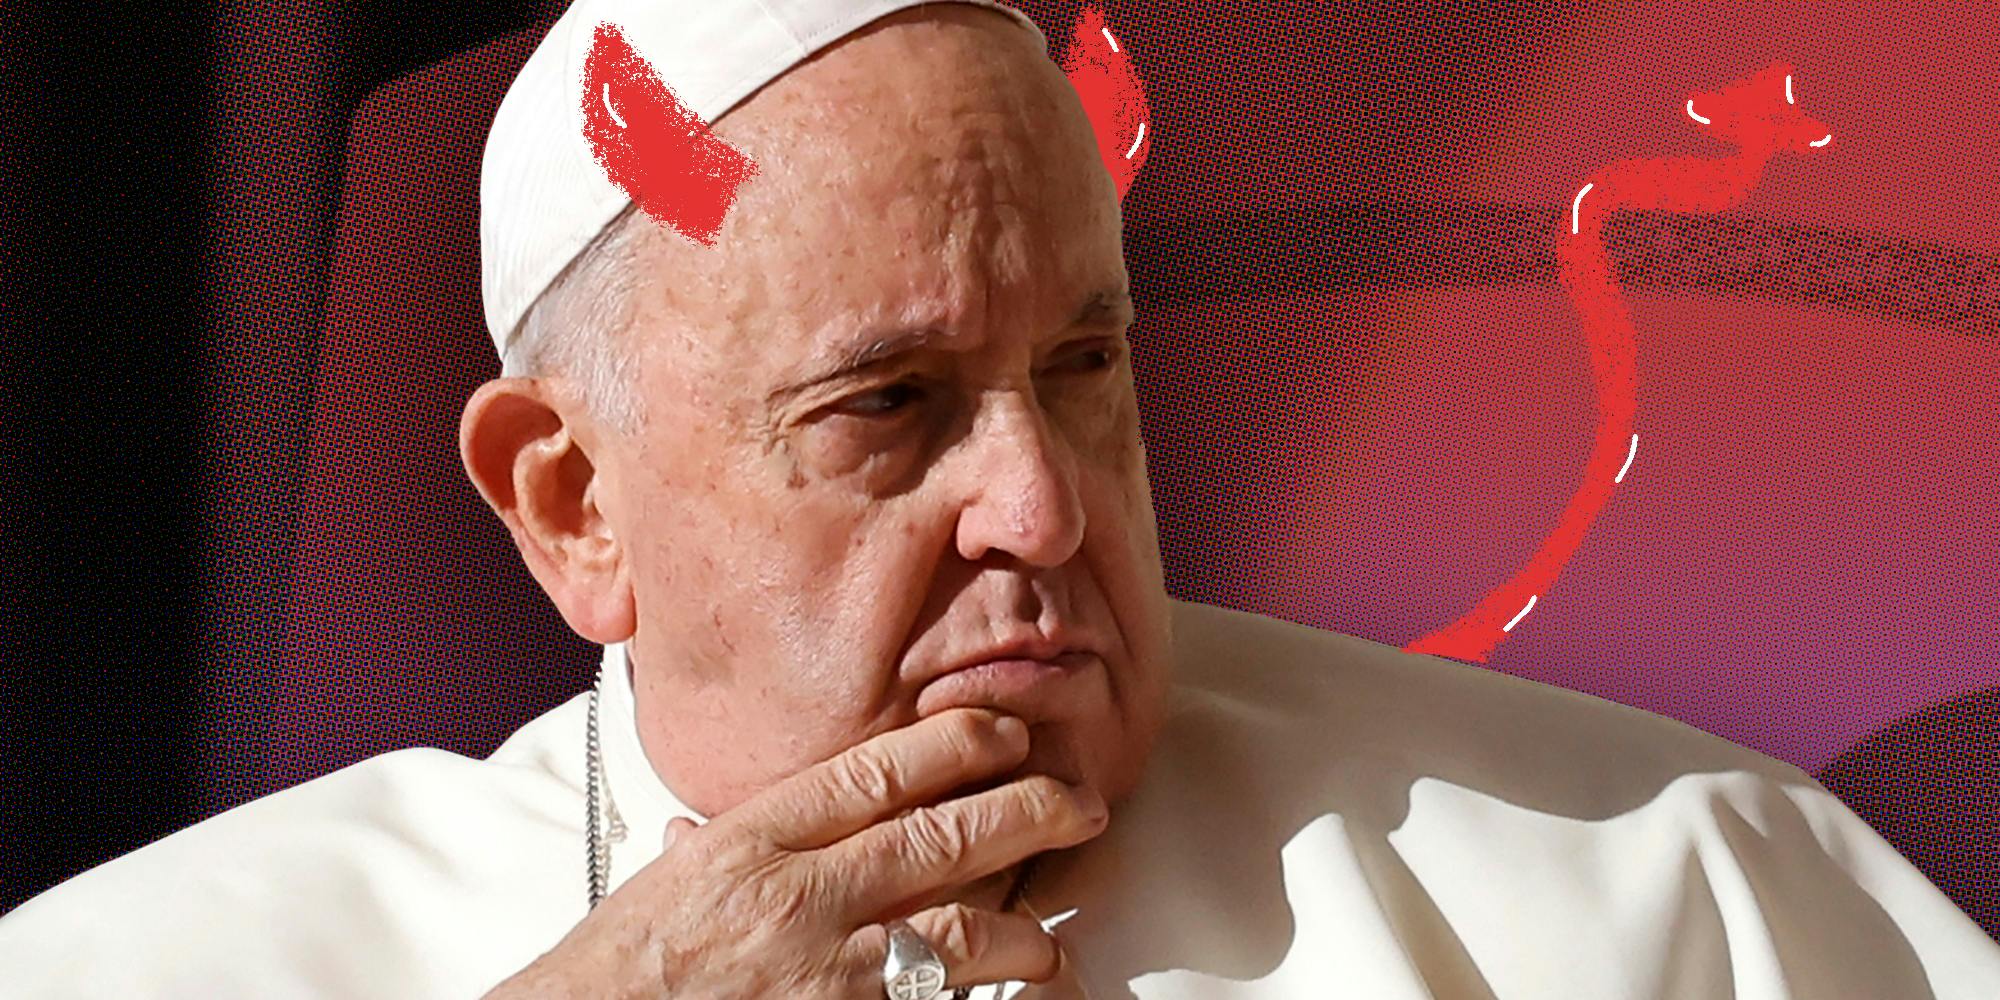 Pope Francis deemed Satanic by Christian conservatives for preaching love, tolerance toward migrants